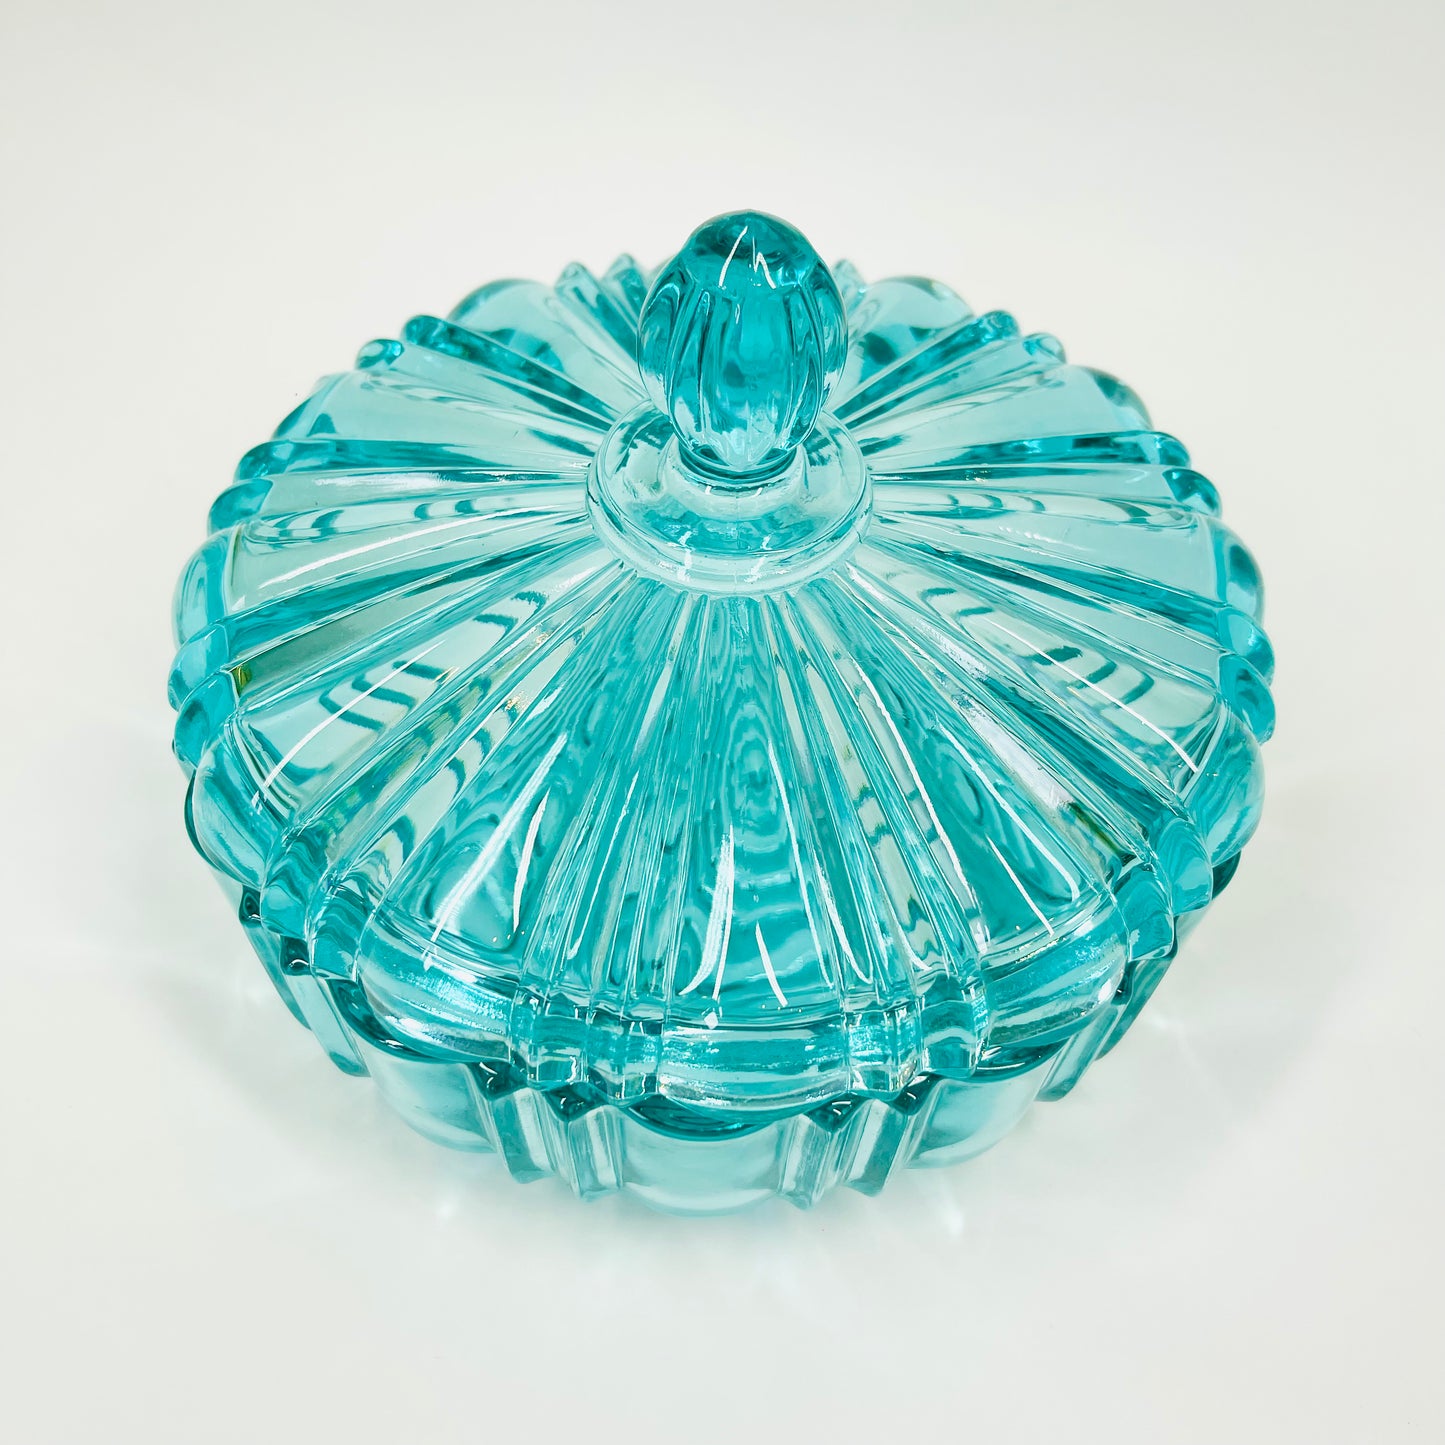 Midcentury pressed turquoise glass lidded box/sugar bowl with cork lid